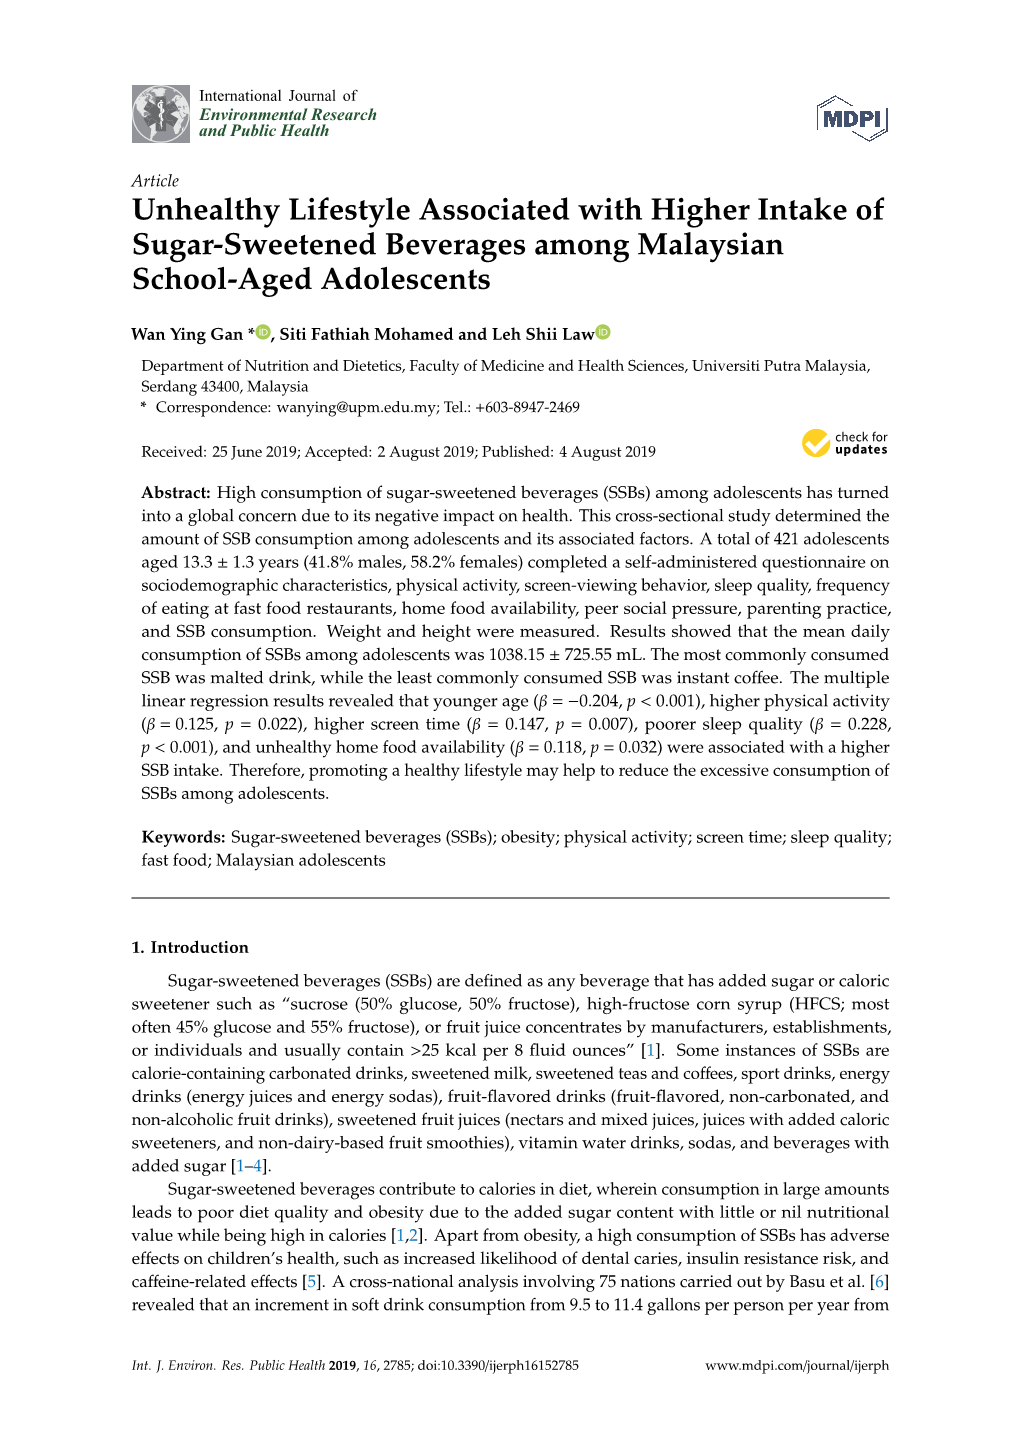 Unhealthy Lifestyle Associated with Higher Intake of Sugar-Sweetened Beverages Among Malaysian School-Aged Adolescents